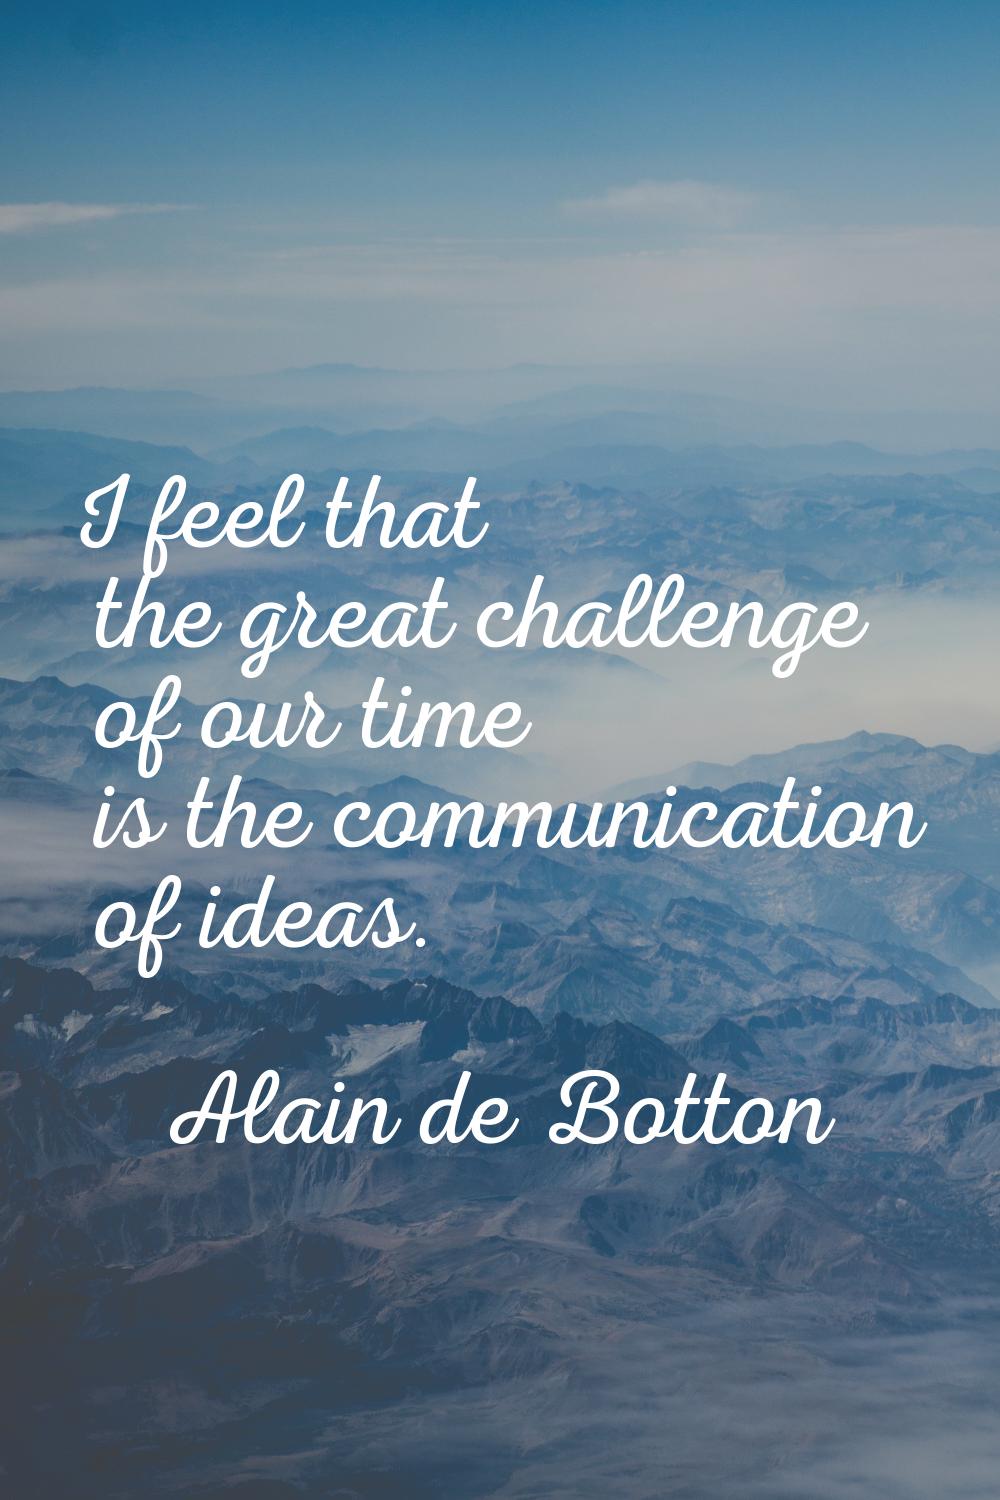 I feel that the great challenge of our time is the communication of ideas.